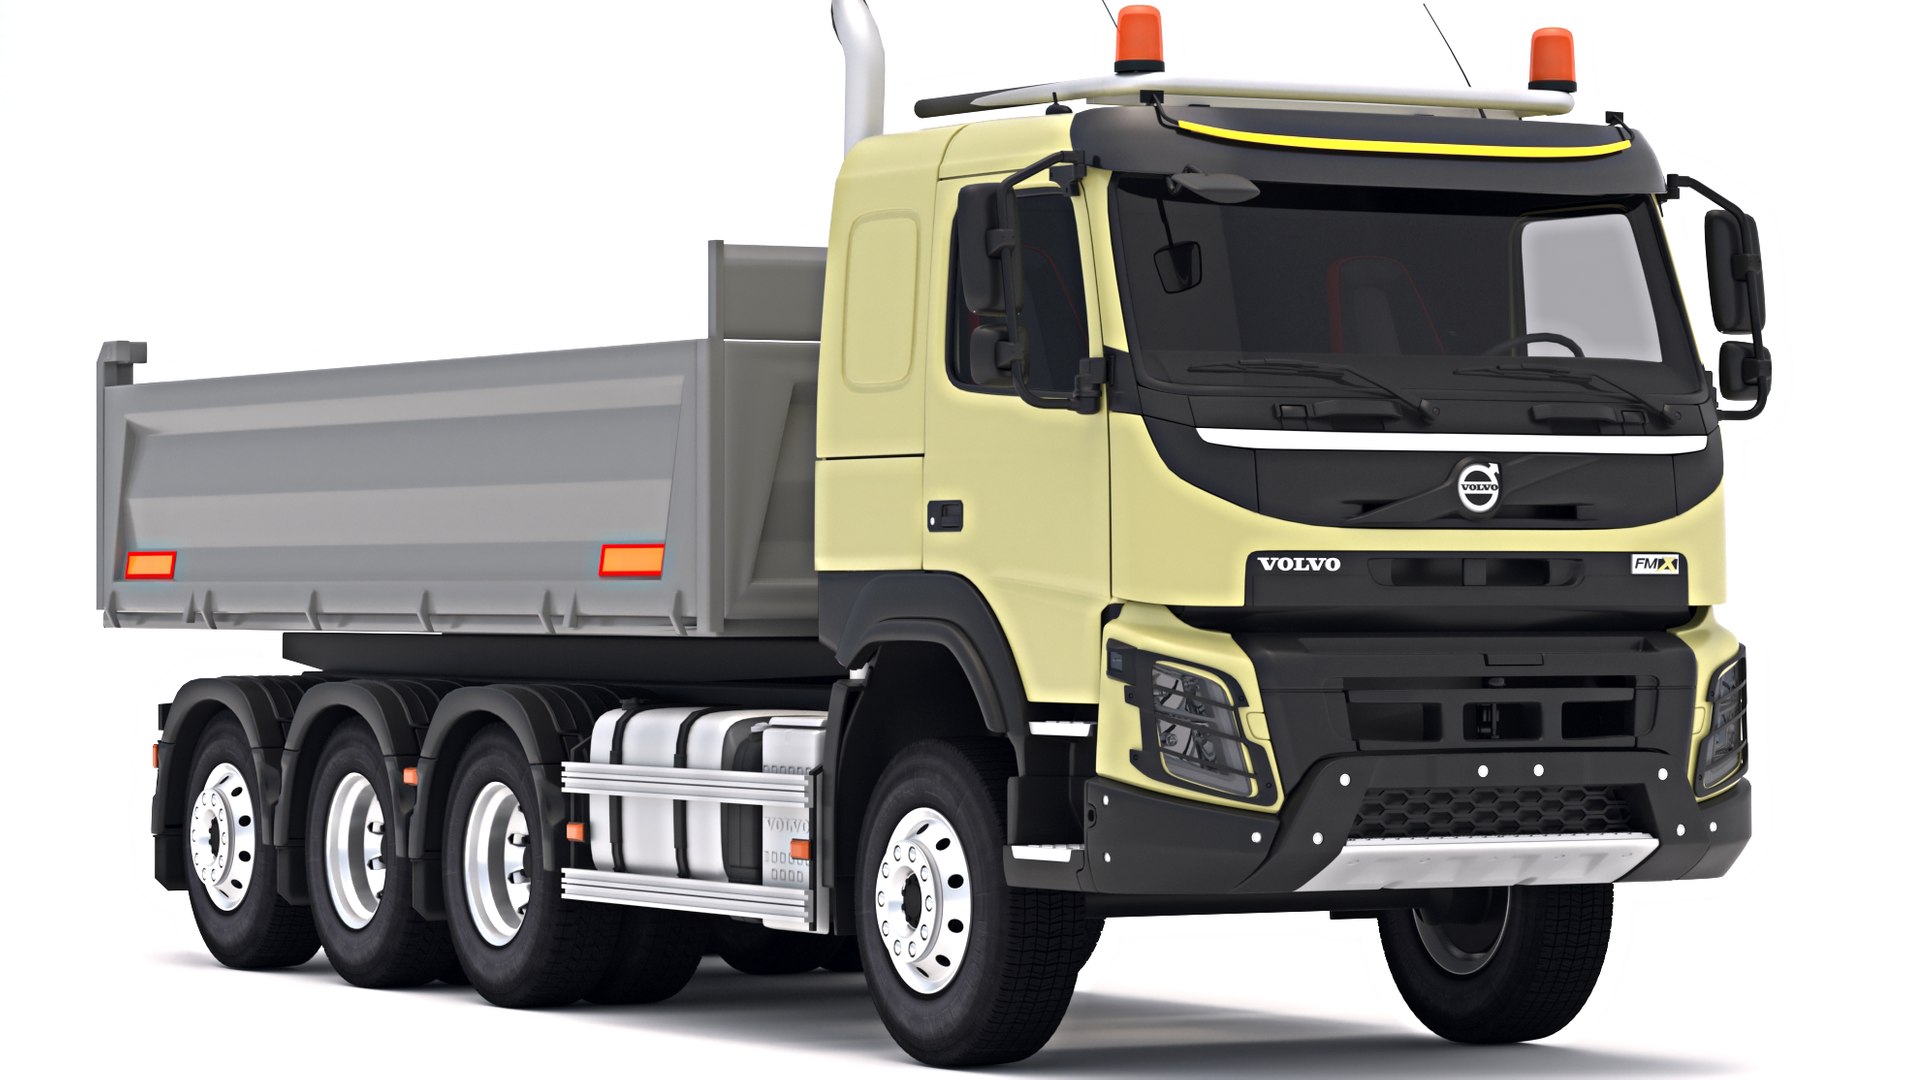 Trucks_Dekho on X: The Volvo FMX 460 8x4 Tipper is designed to tackle the  harshness of mining and construction application and comes with unique  U-type body design apt for carrying lightweight raw